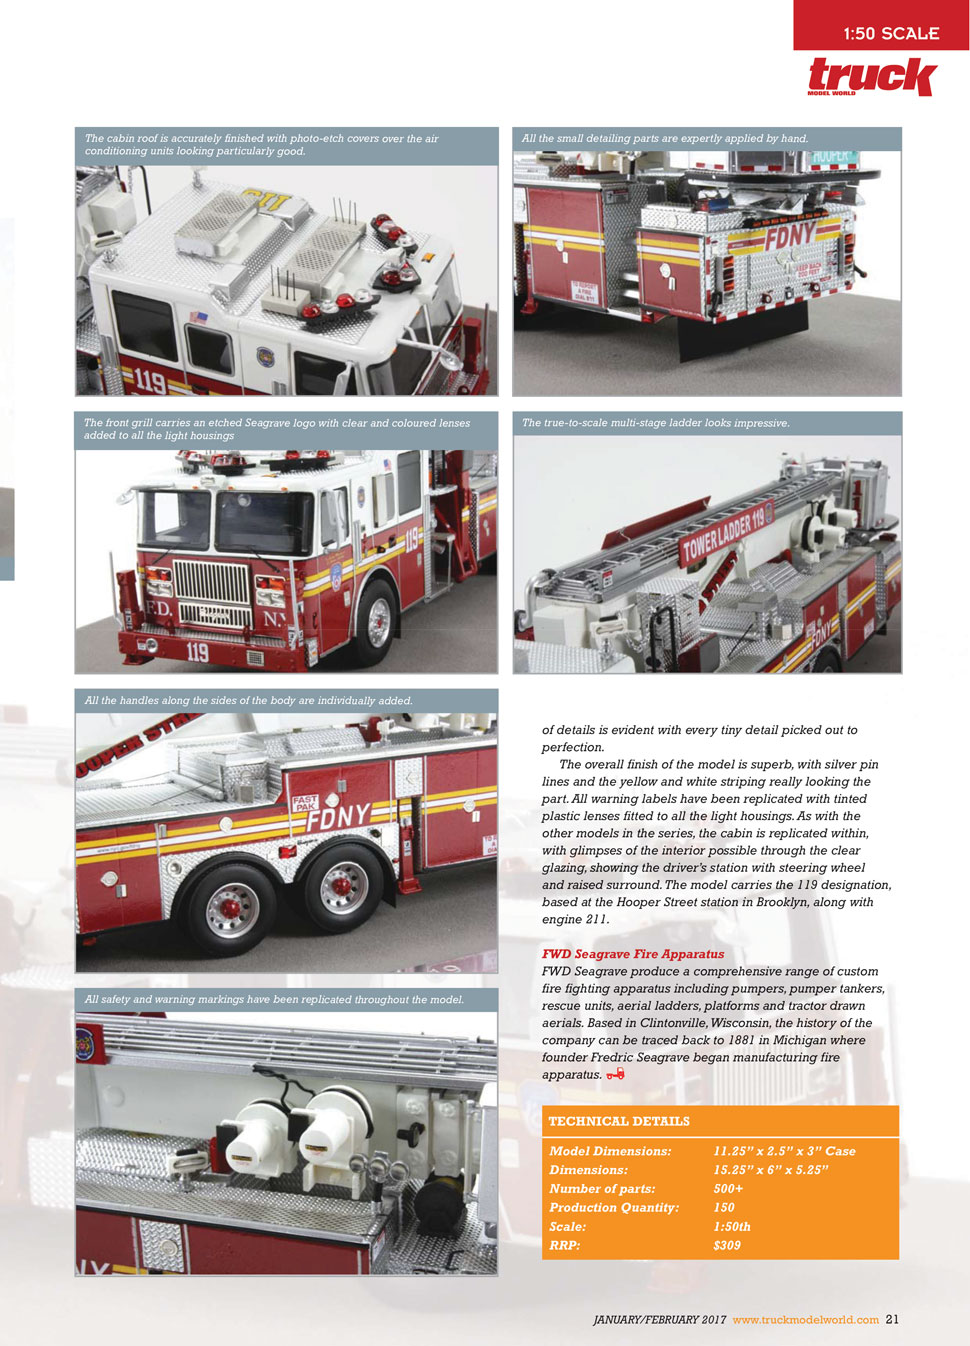 Order your FDNY Tower Ladder 119 museum grade scale model